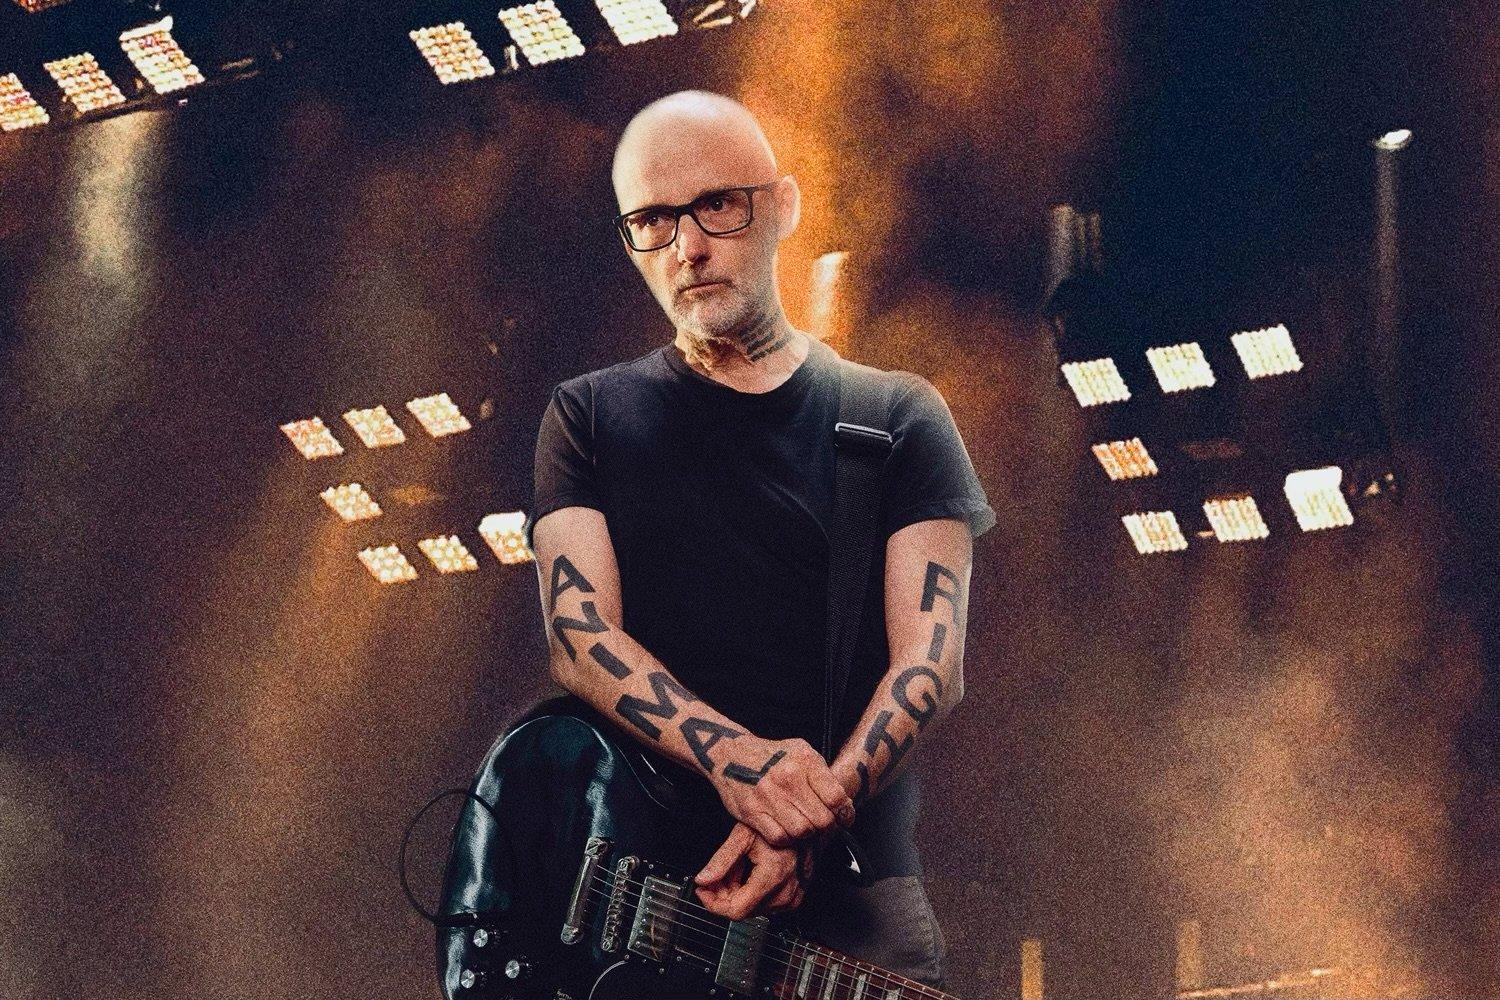 Moby performing on stage